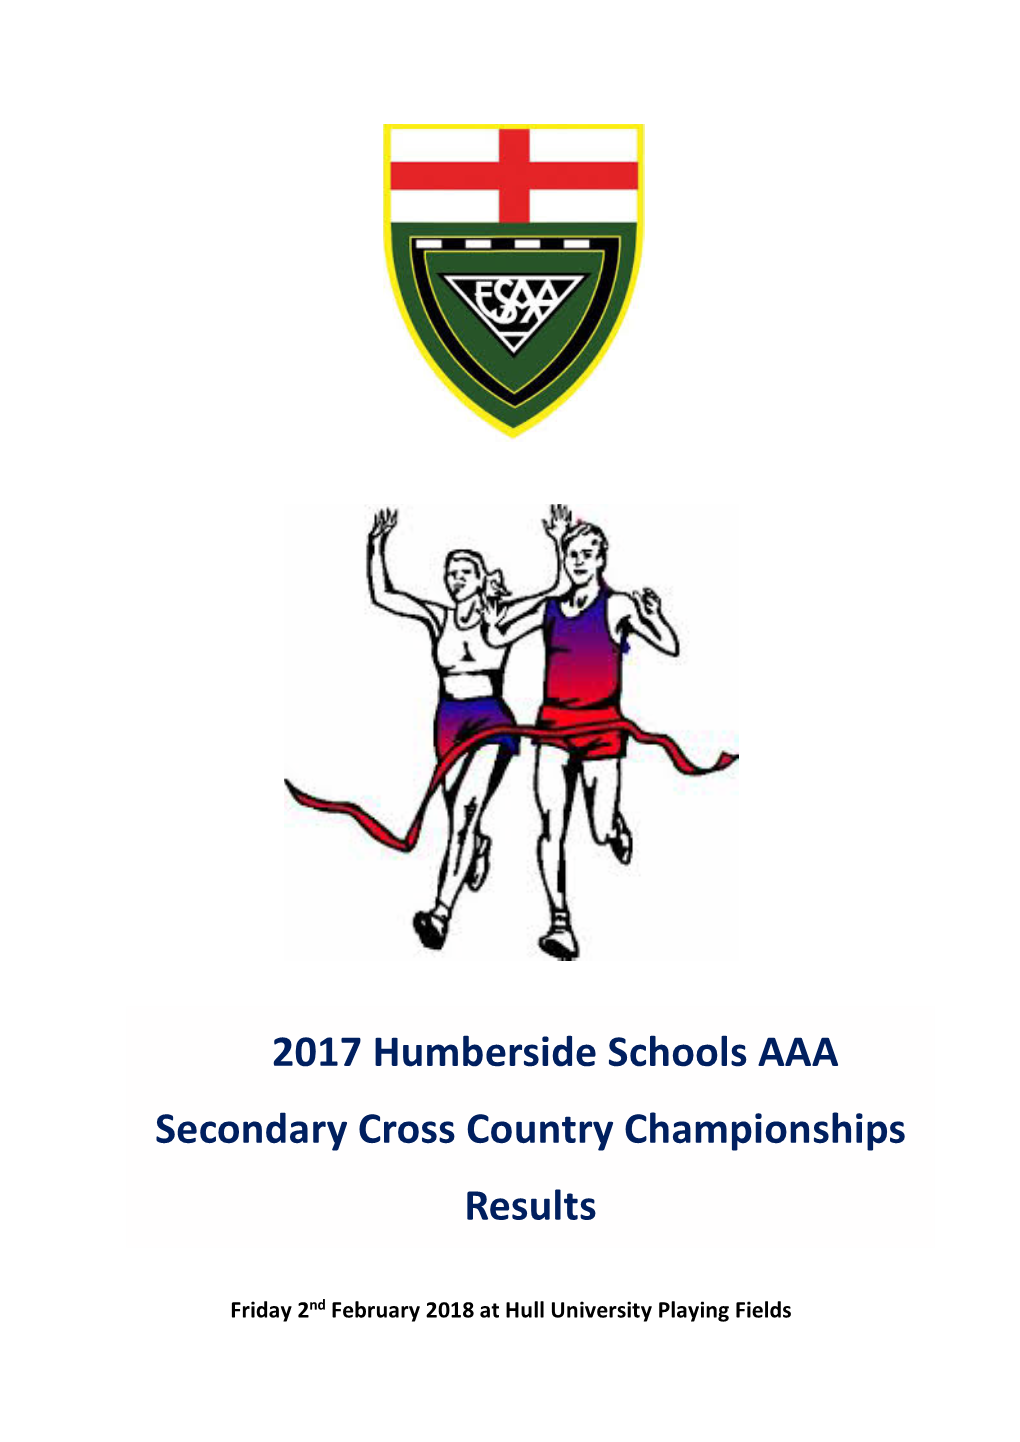 2017 Humberside Schools AAA Secondary Cross Country Championships Results